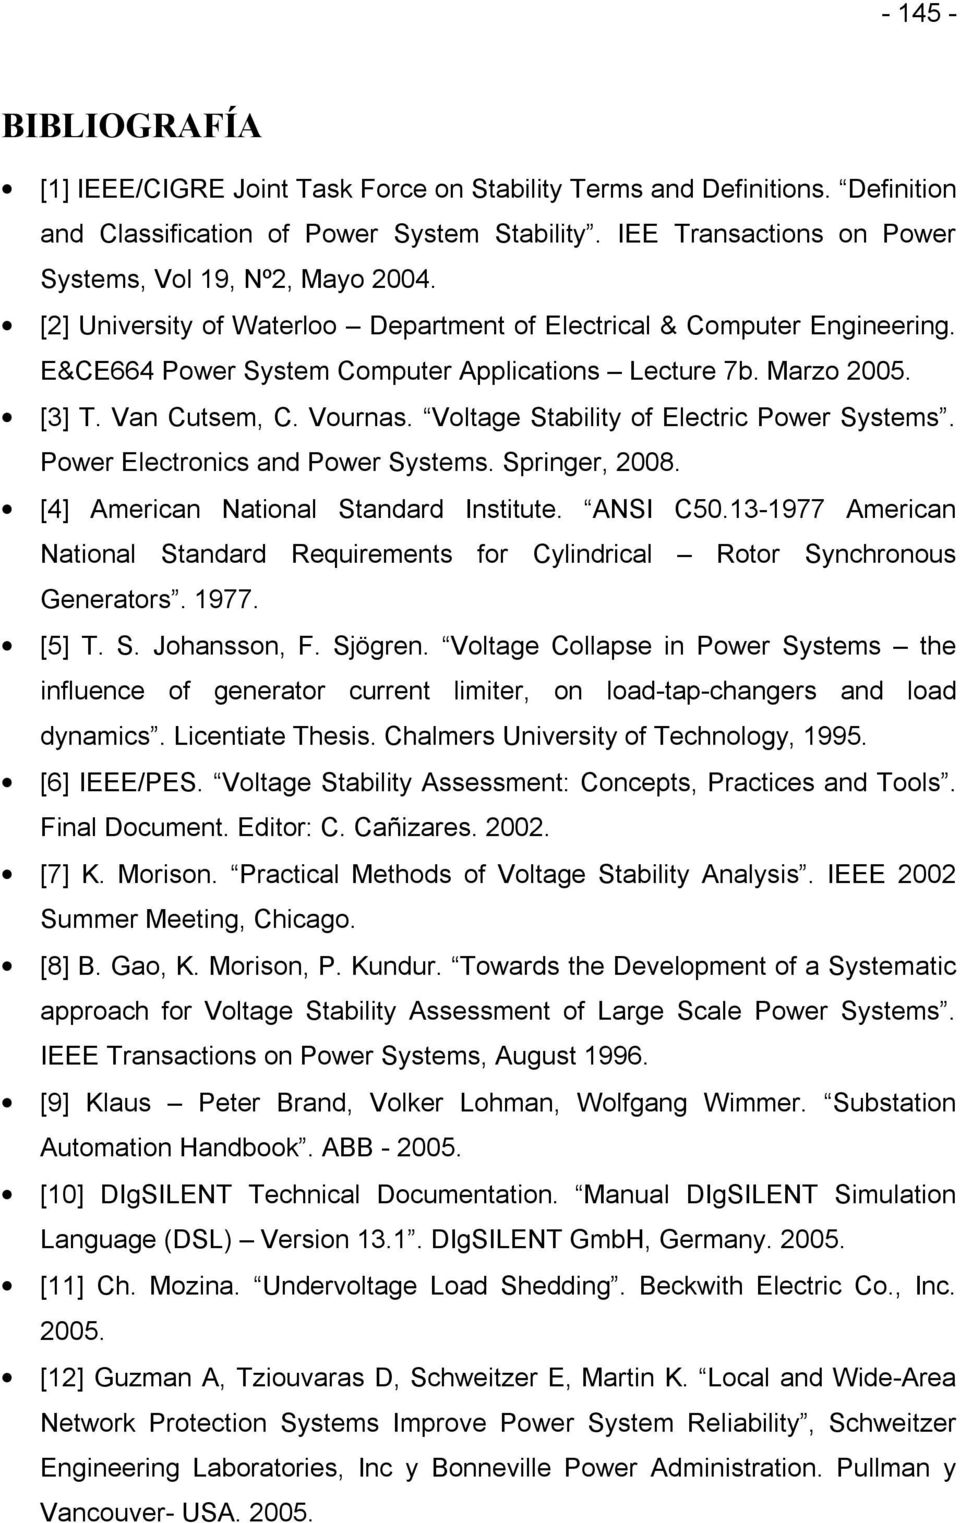 Marzo 2005. [3] T. Van Cutsem, C. Vournas. Voltage Stability of Electric Power Systems. Power Electronics and Power Systems. Springer, 2008. [4] American National Standard Institute. ANSI C50.